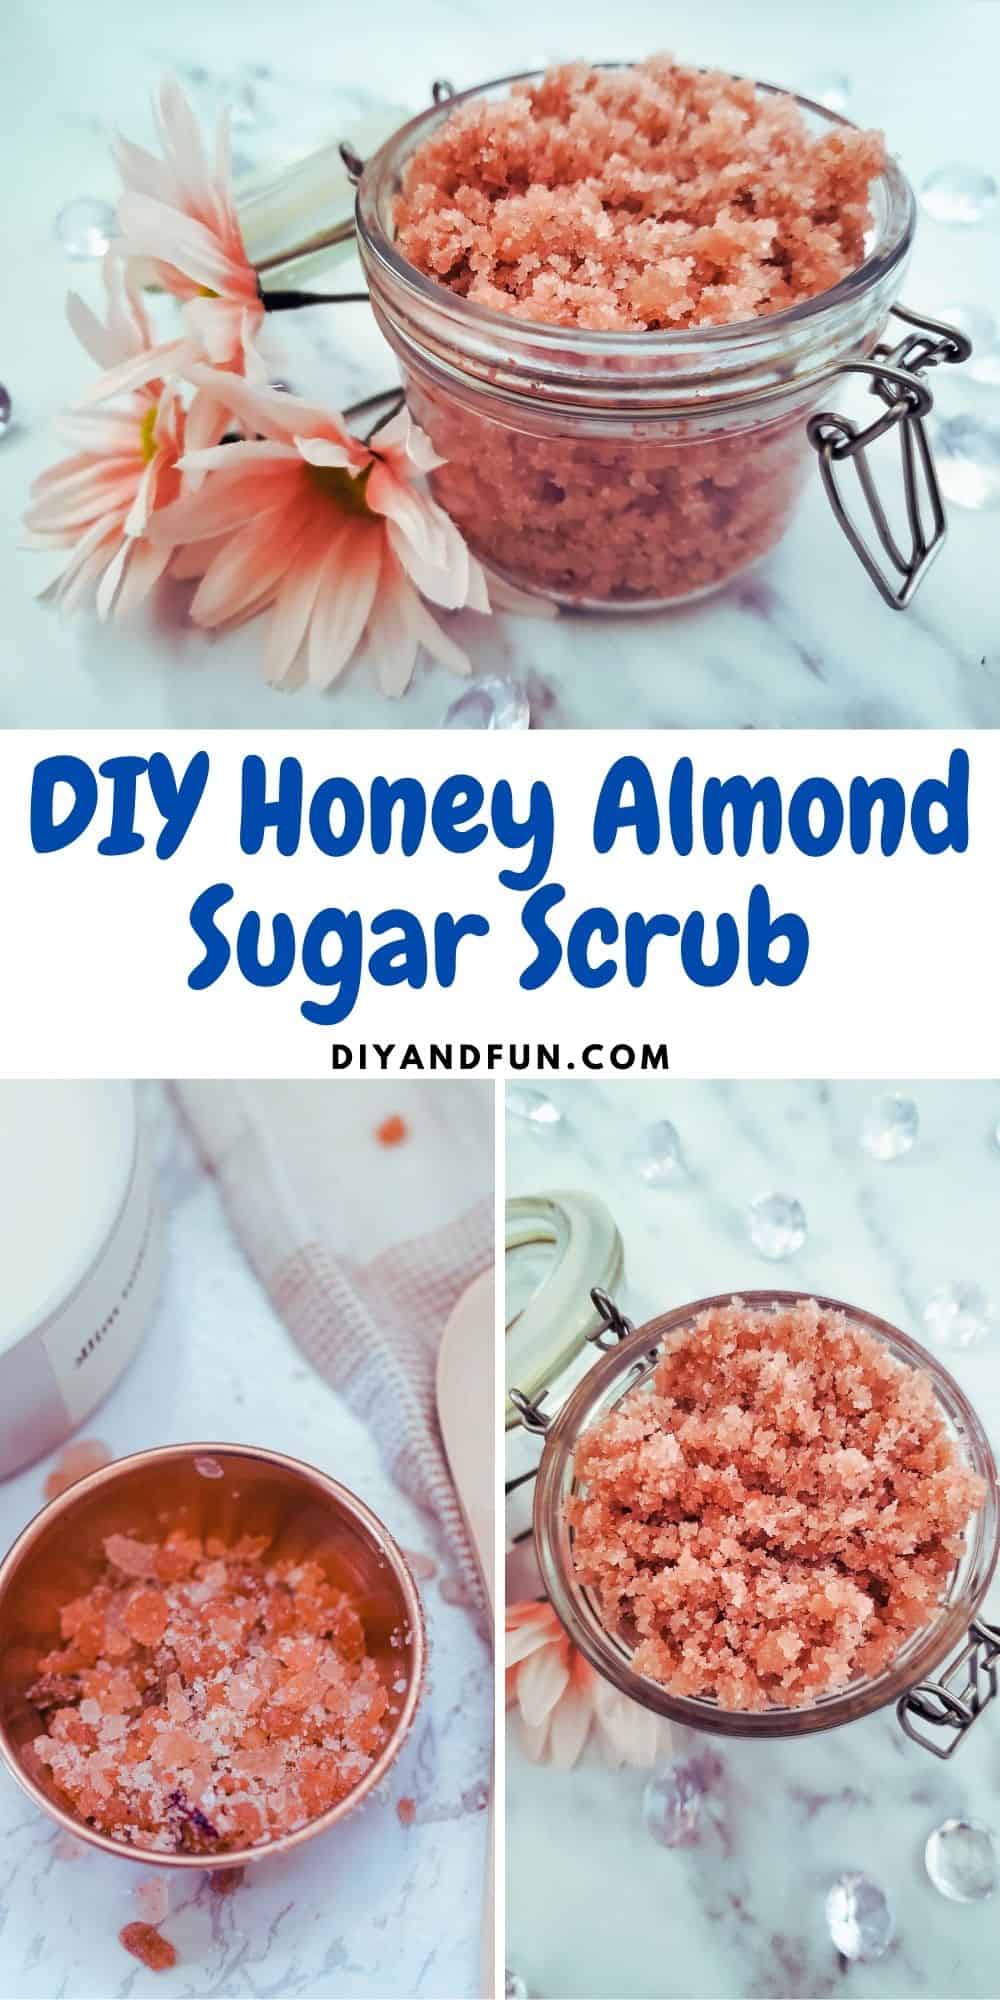 DIY Honey Almond Sugar Scrub, a simple beauty recipe for a body skin scrub that exfoliates and and helps to soothe the skin.